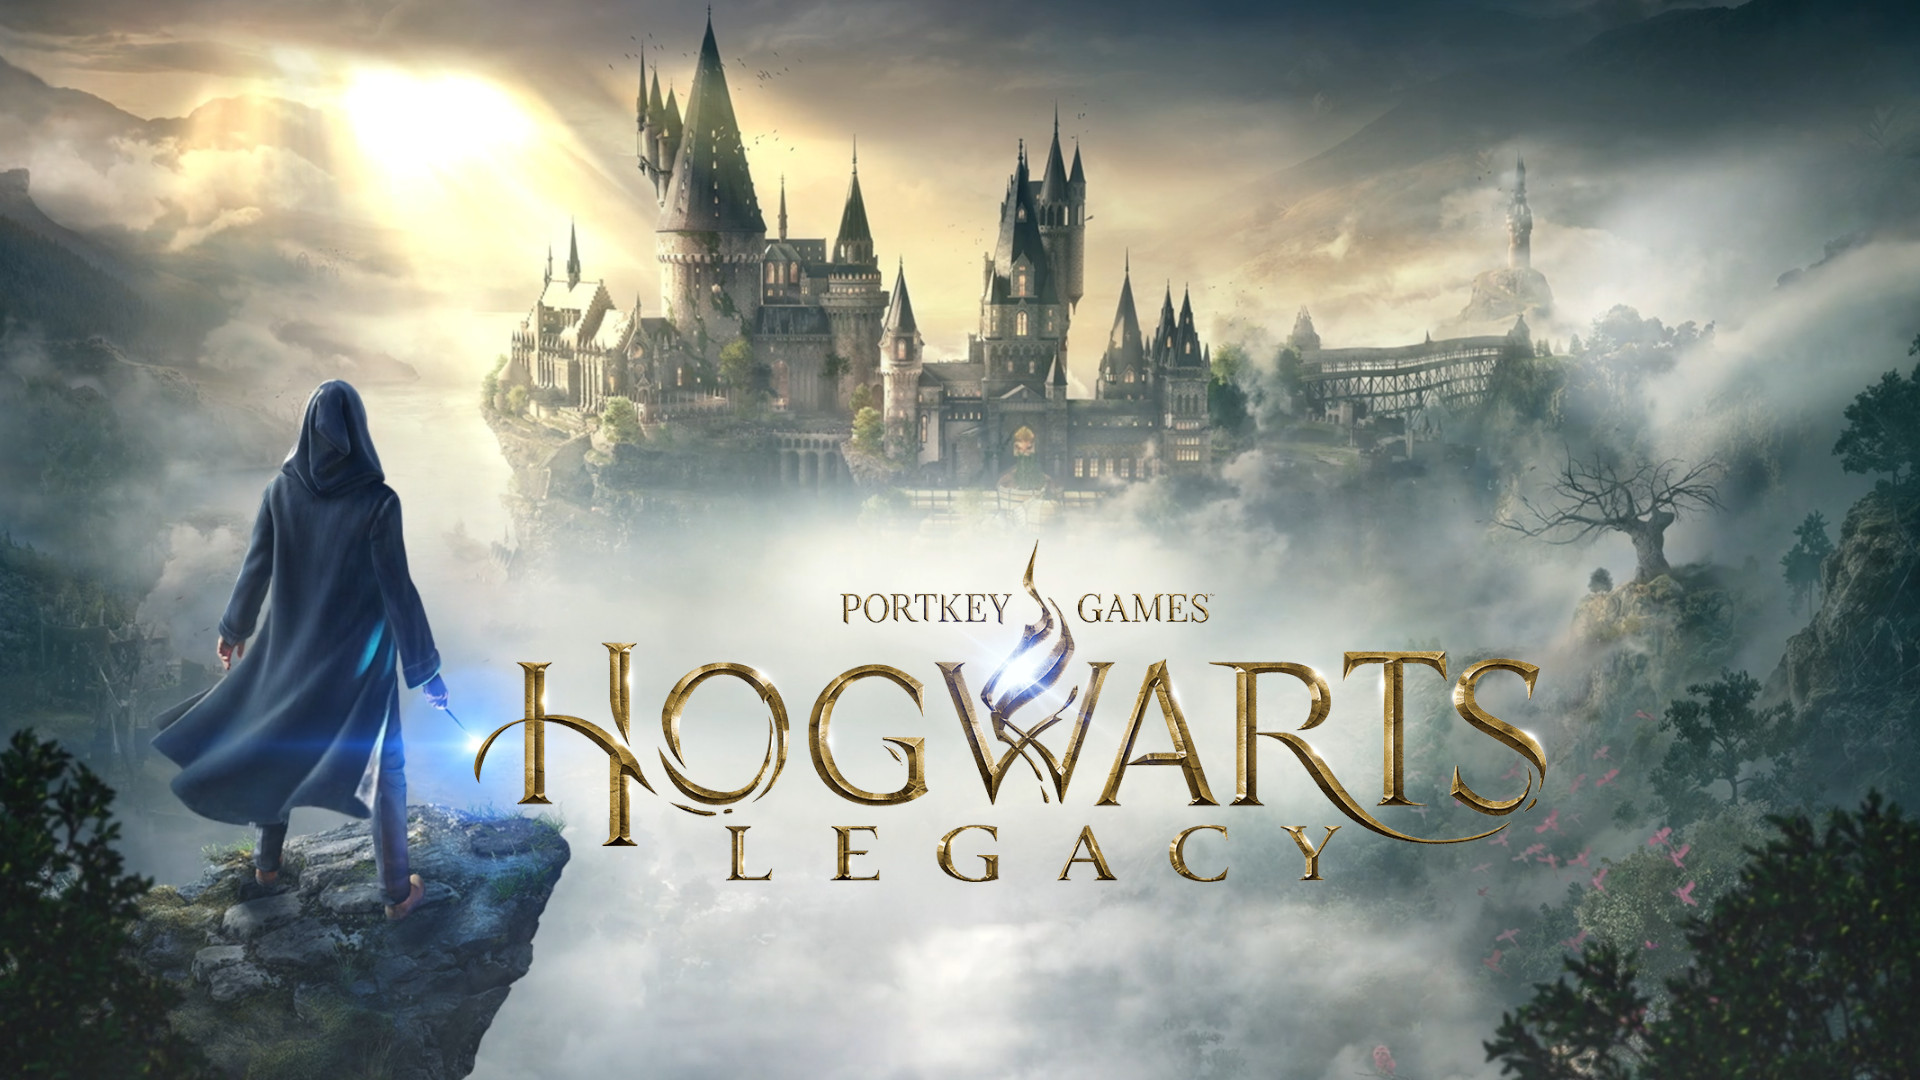 Hogwarts Legacy system requirements consume 85GB of your SSD